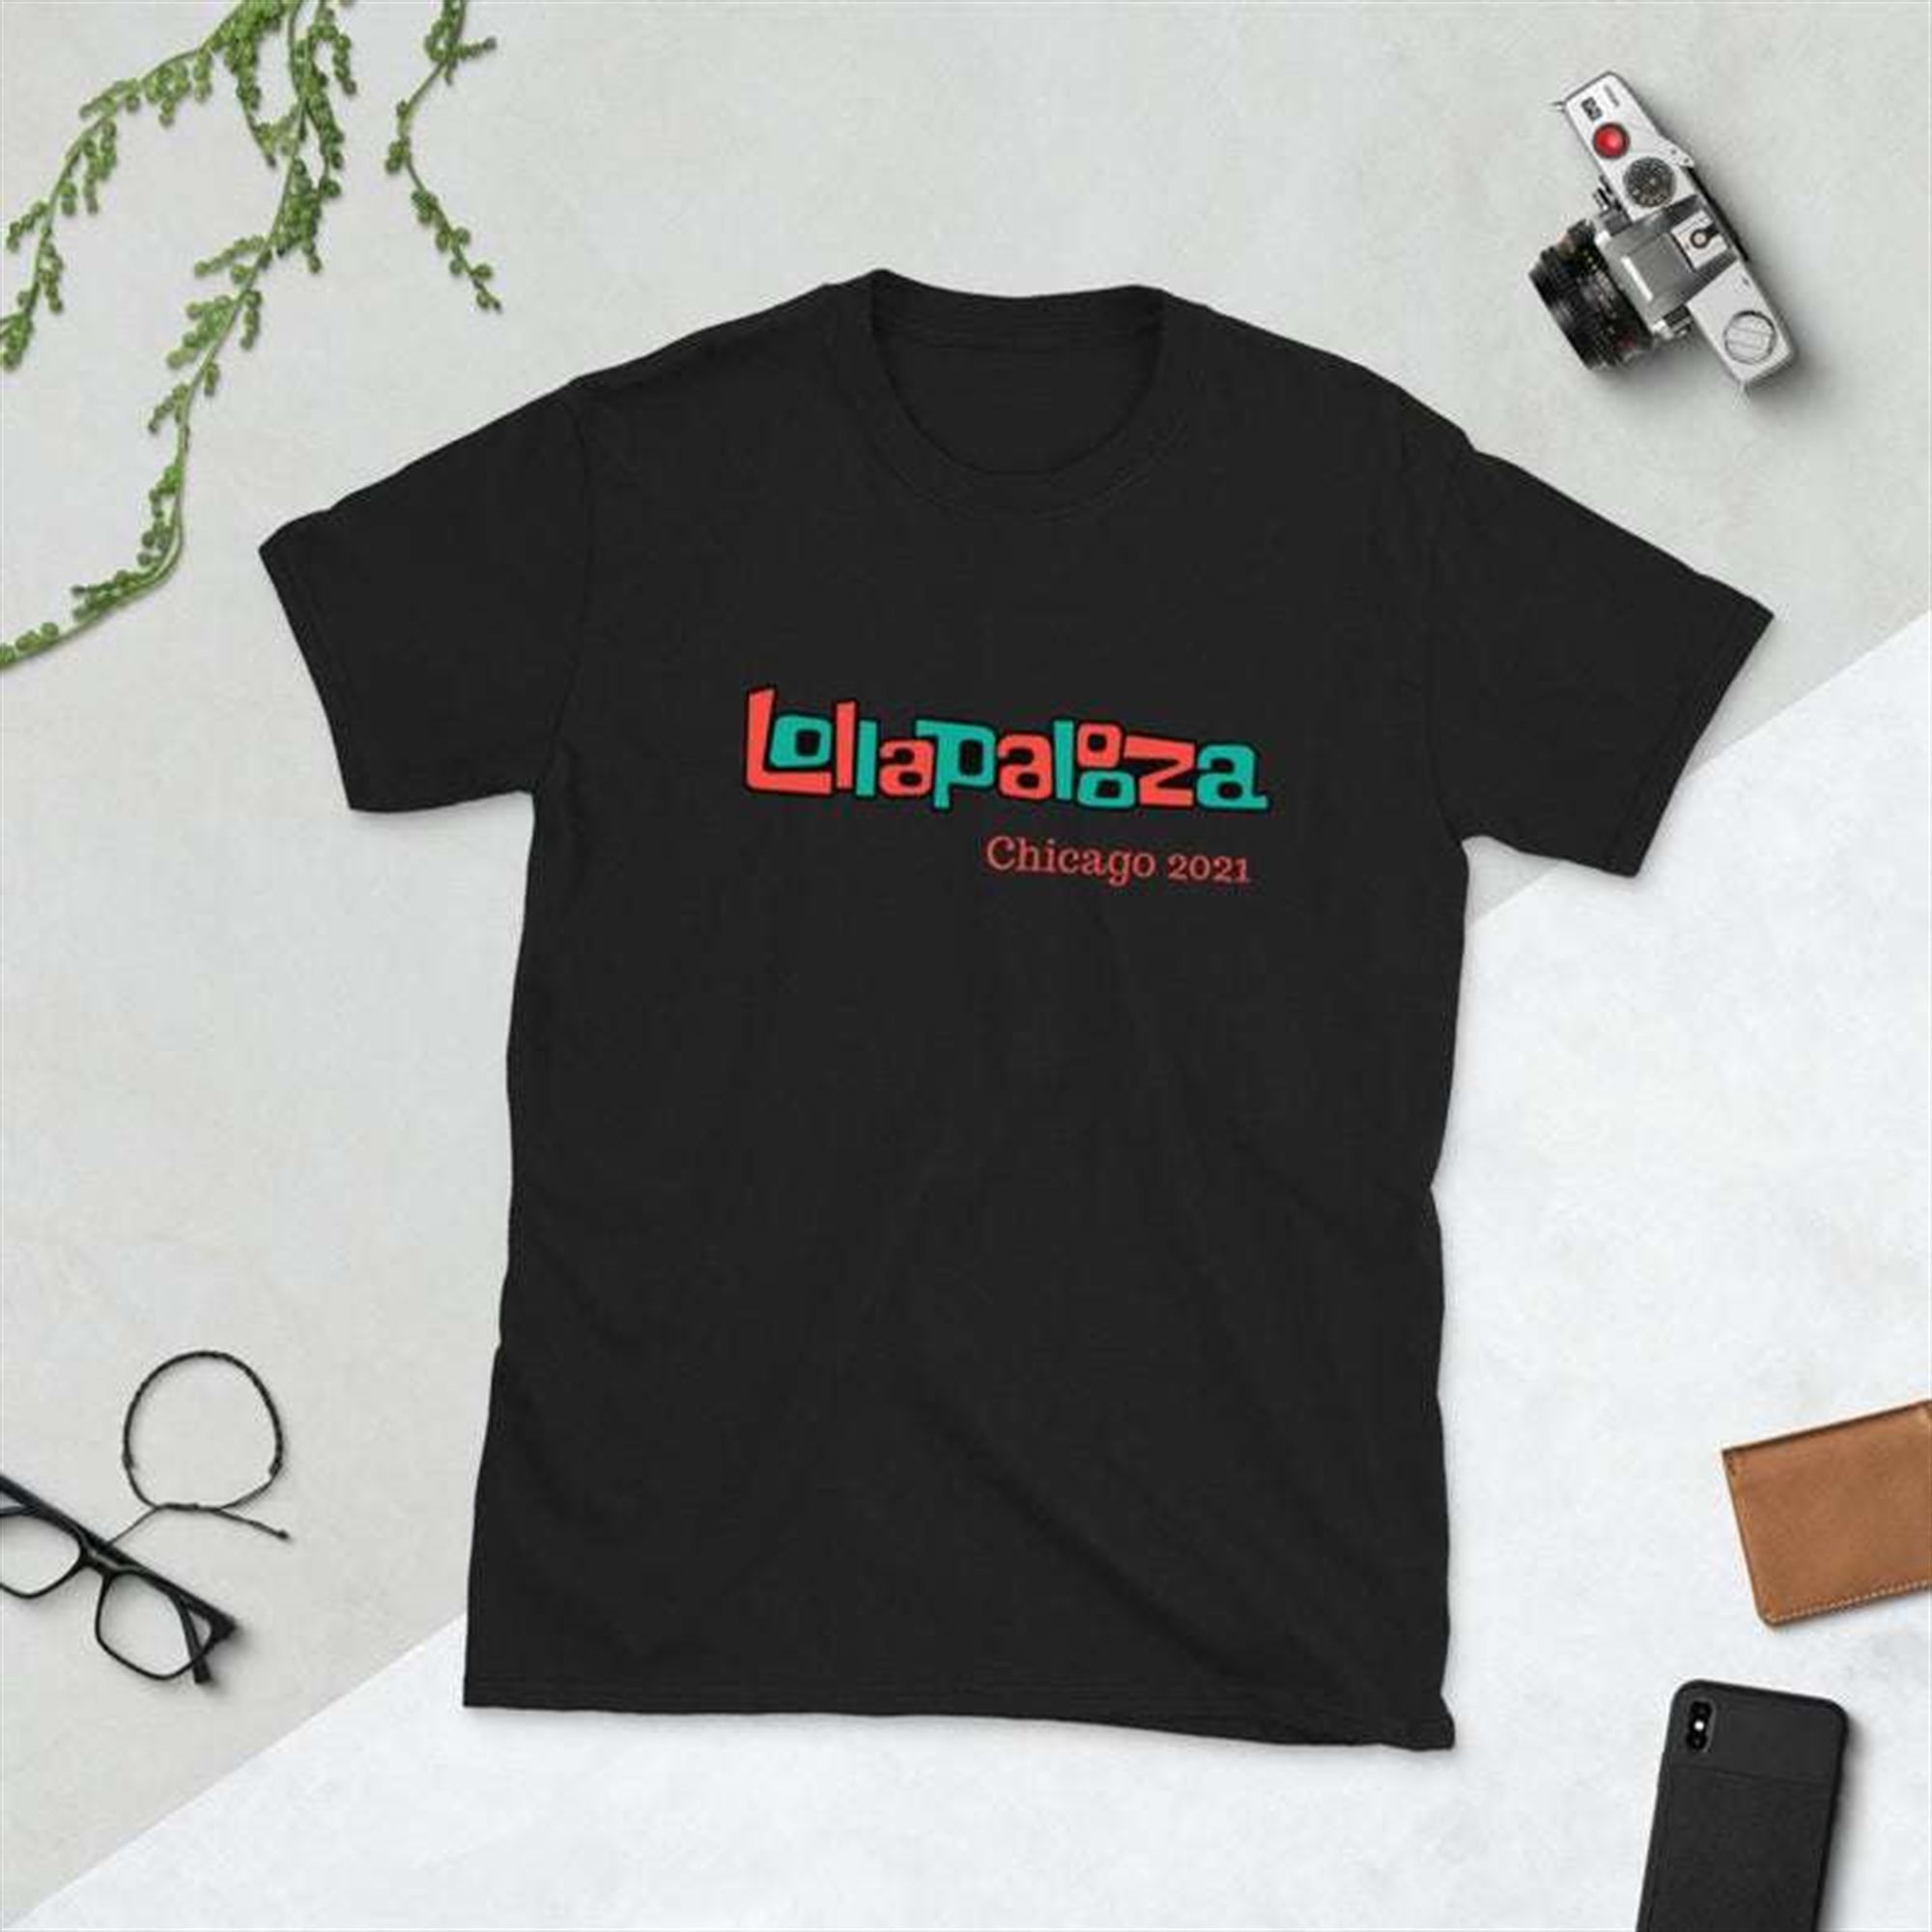 Lollapalooza Chicago 2021 T Shirt Size Up To 5xl